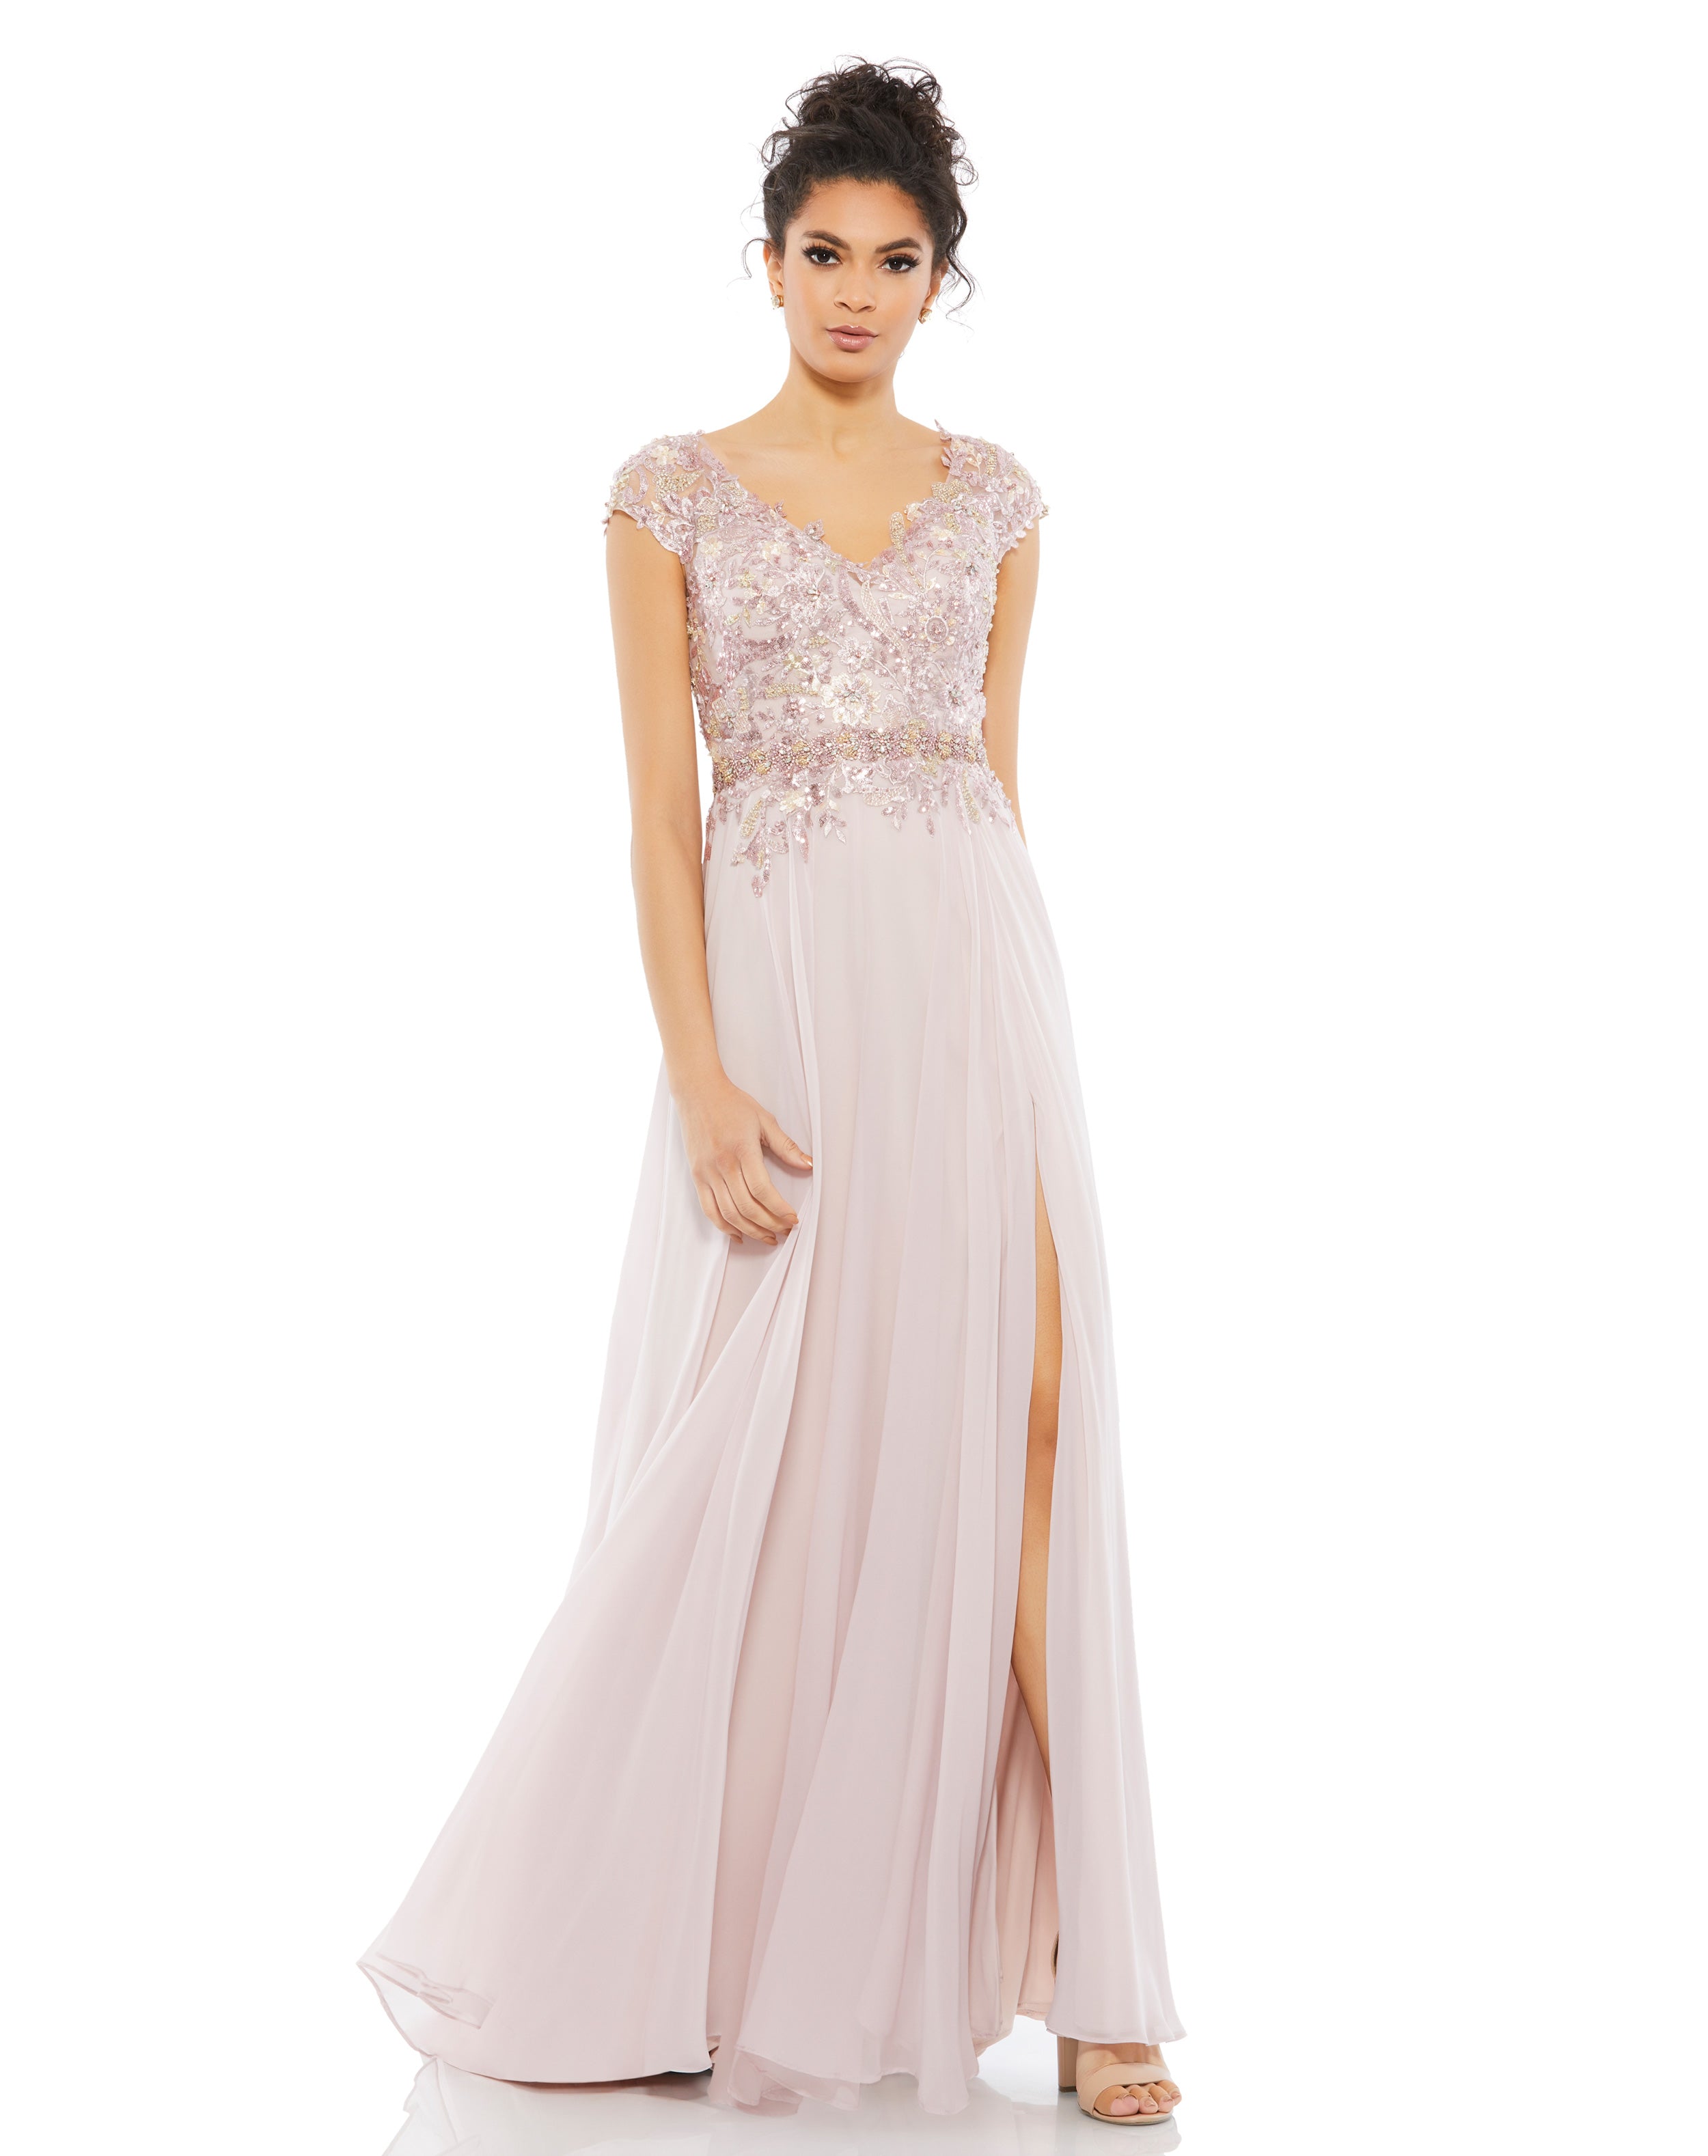 Embellished Cap Sleeve Bodice Flowy Gown